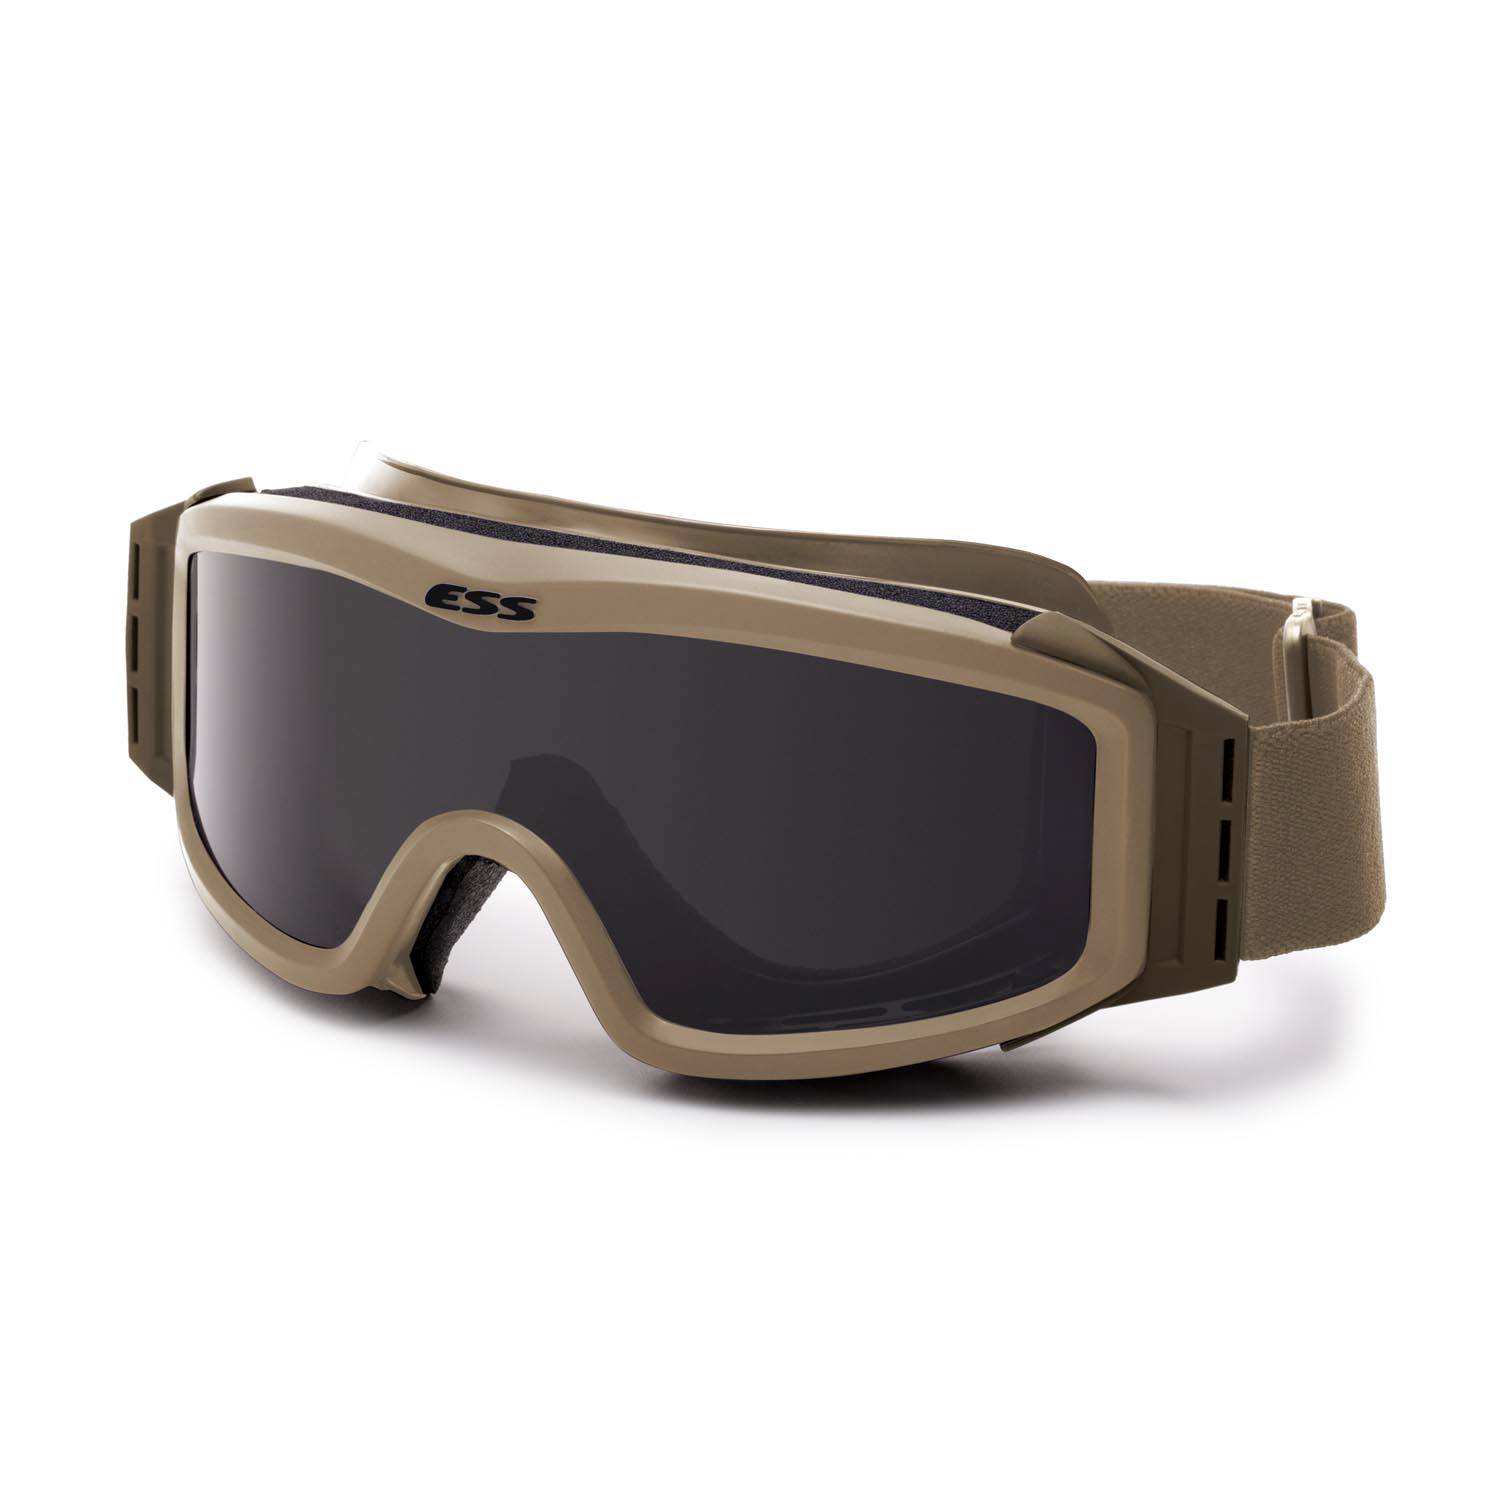 ESS Profile NVG Military Goggles with Interchangeable Lenses